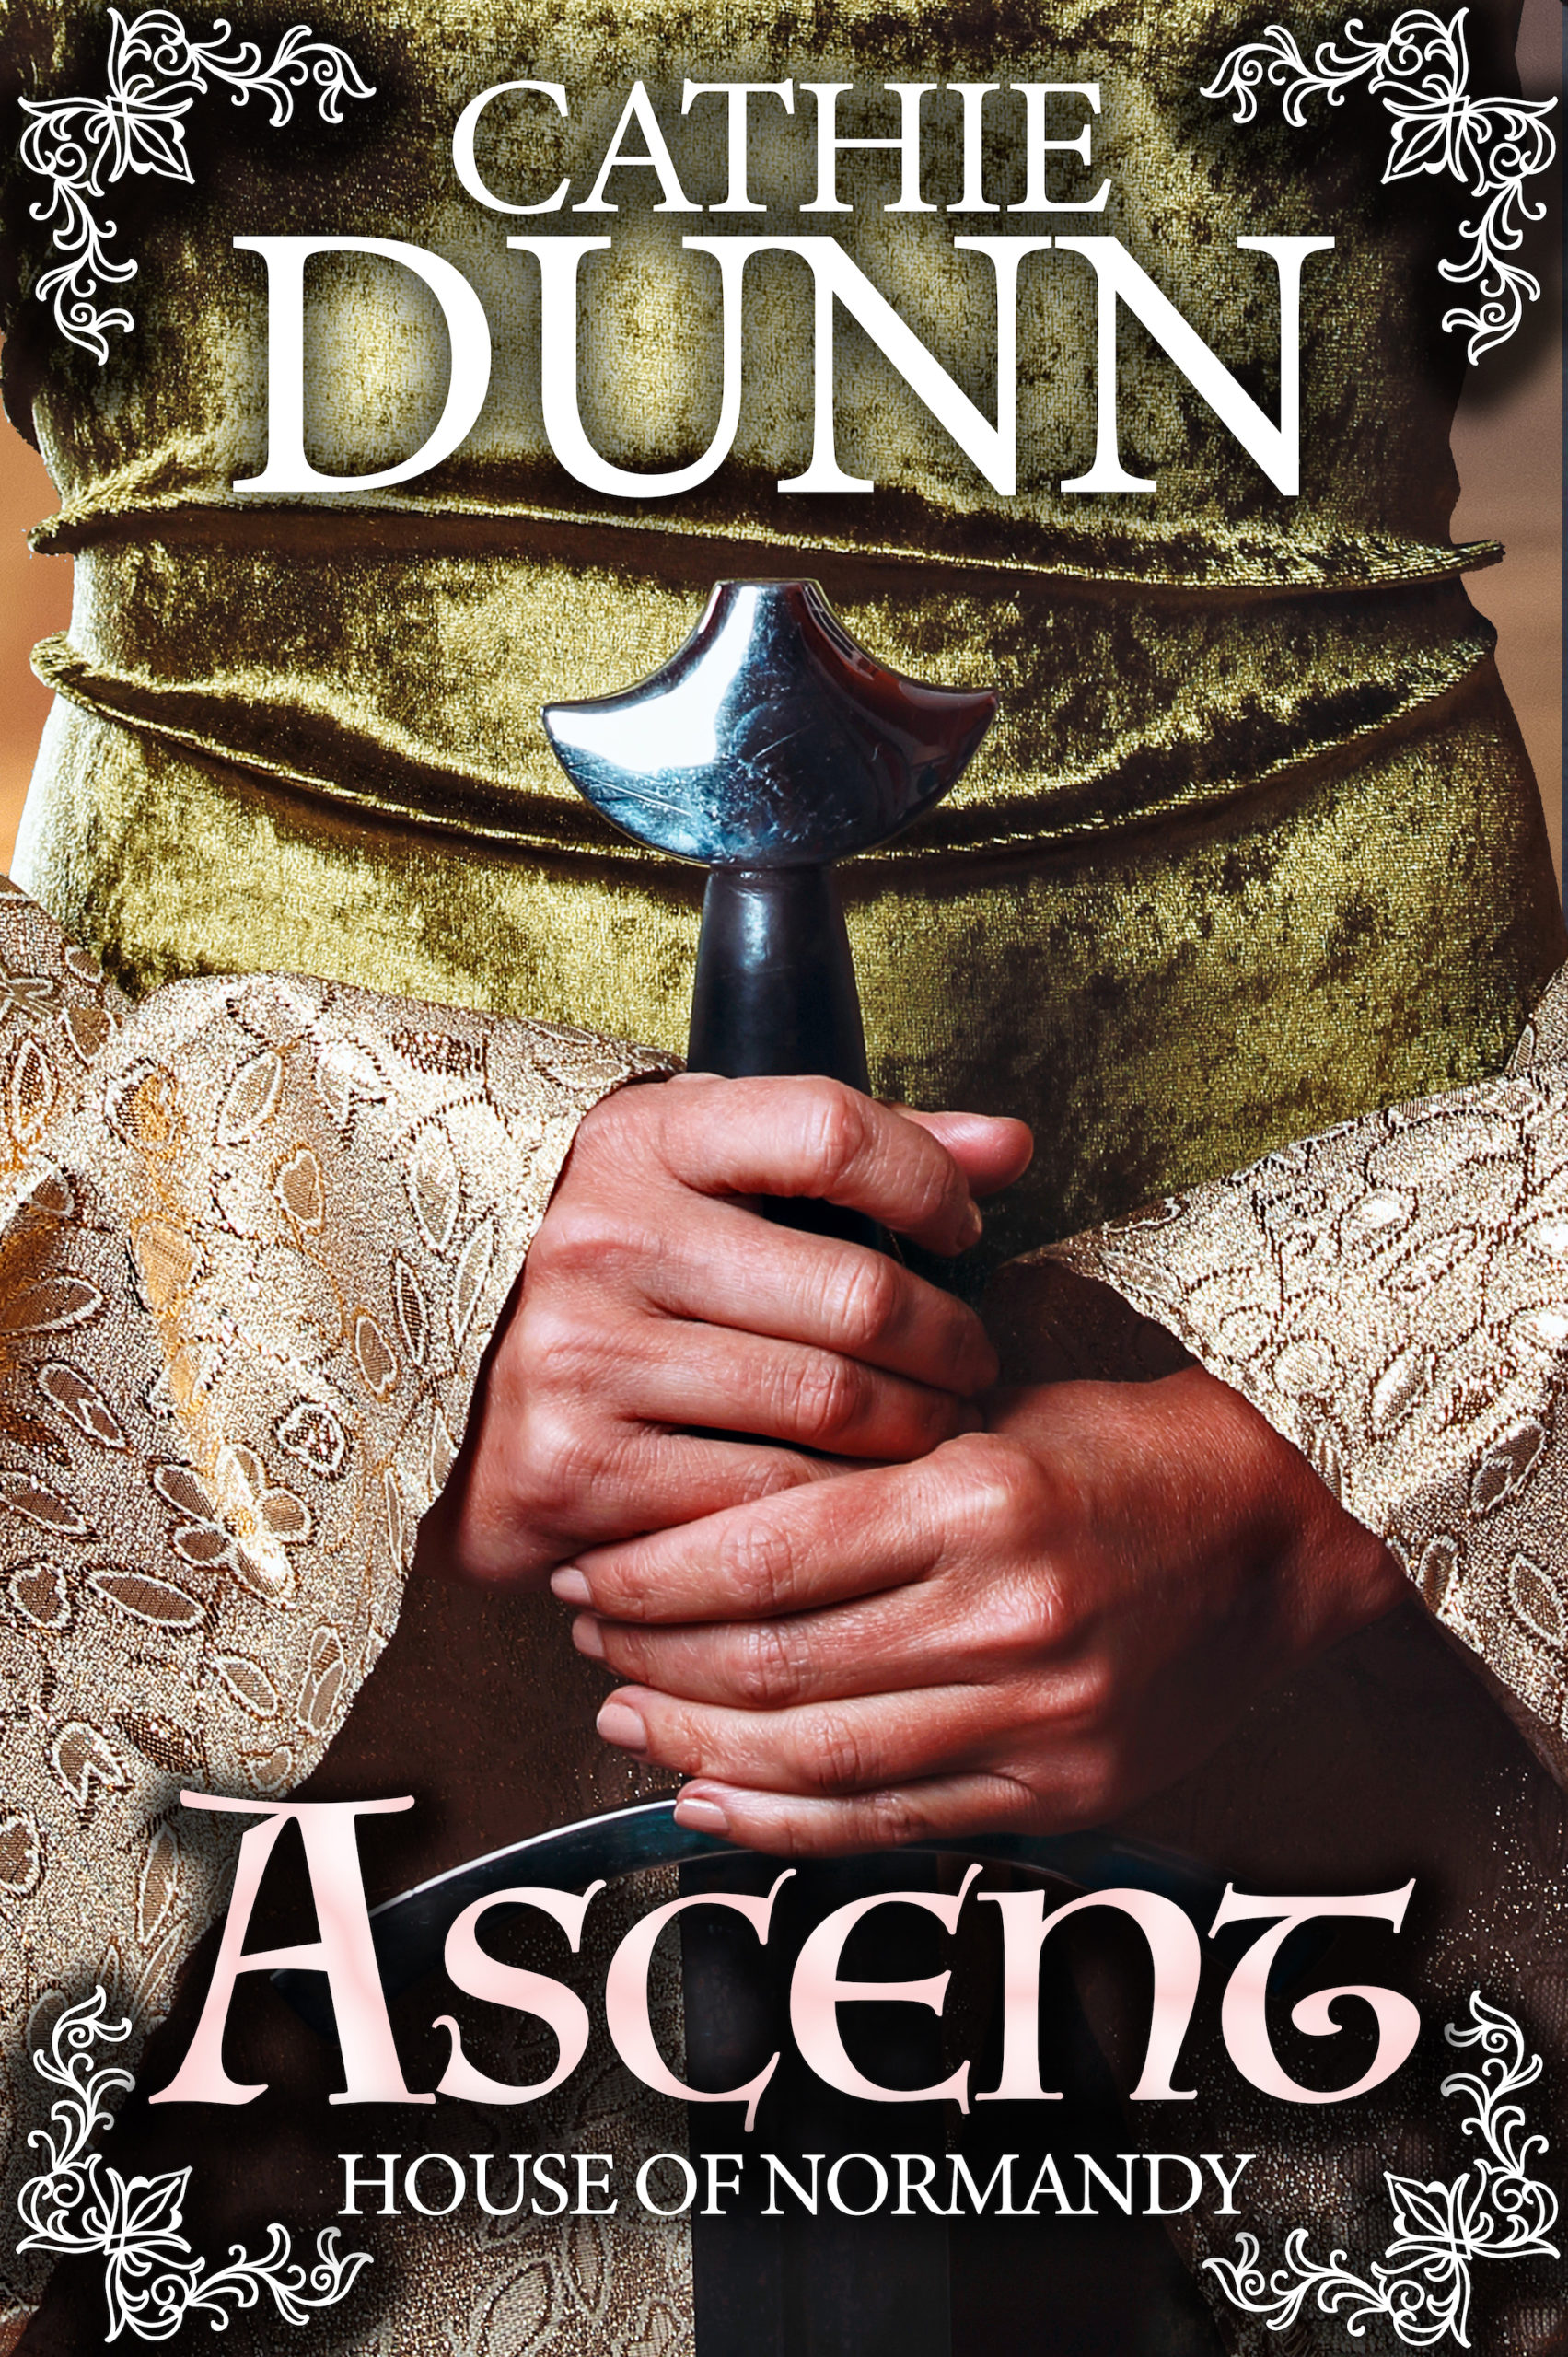 //www.cathiedunn.com/wp-content/uploads/2022/04/Ascent-cover-final-small-scaled.jpeg